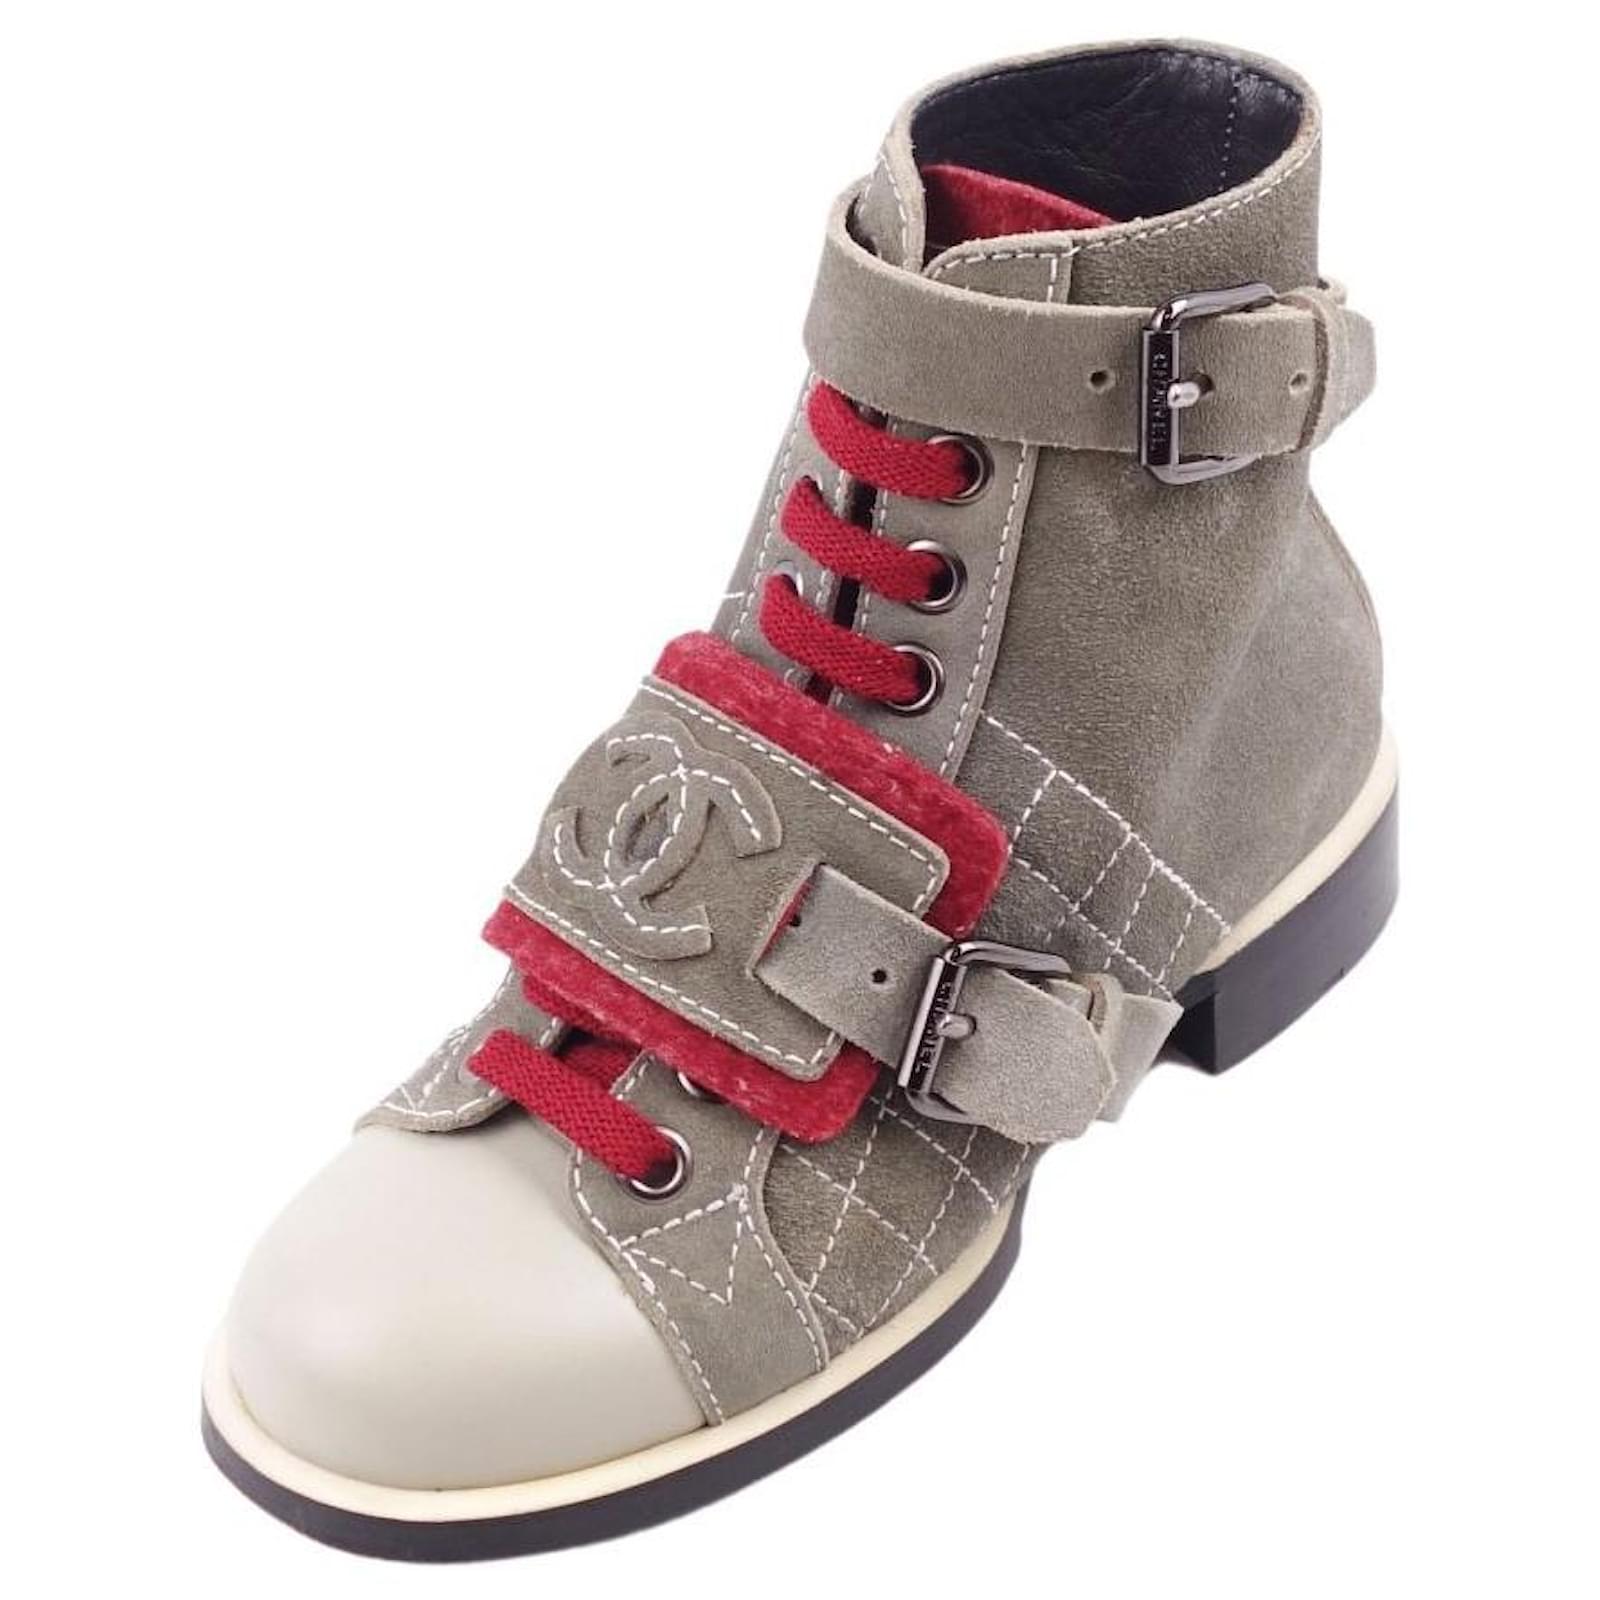 CHANEL Leather High Top Athletic Shoes for Women for sale